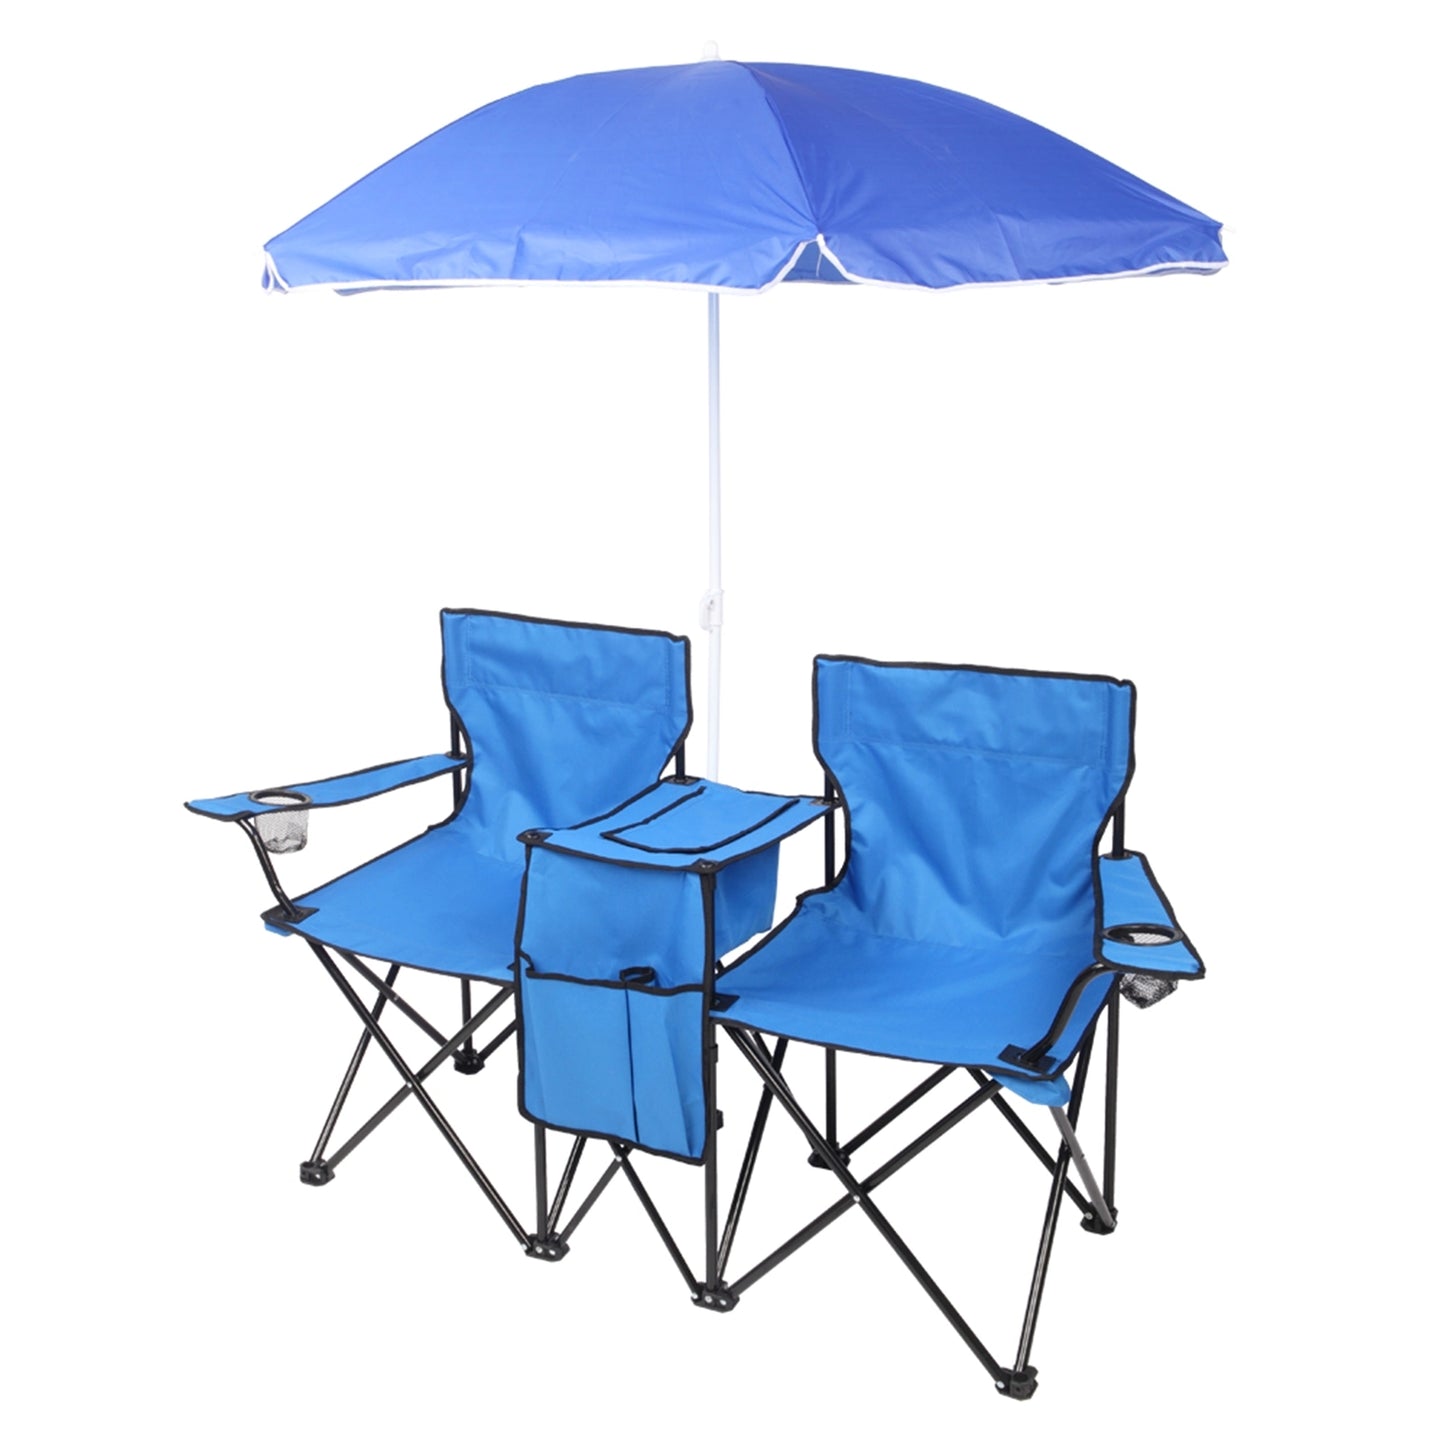 Folding Chair with Umbrella - Outdoor Lightweight Comfortable Beach Chair - Beach Essentials 2-seat Camping Chairs